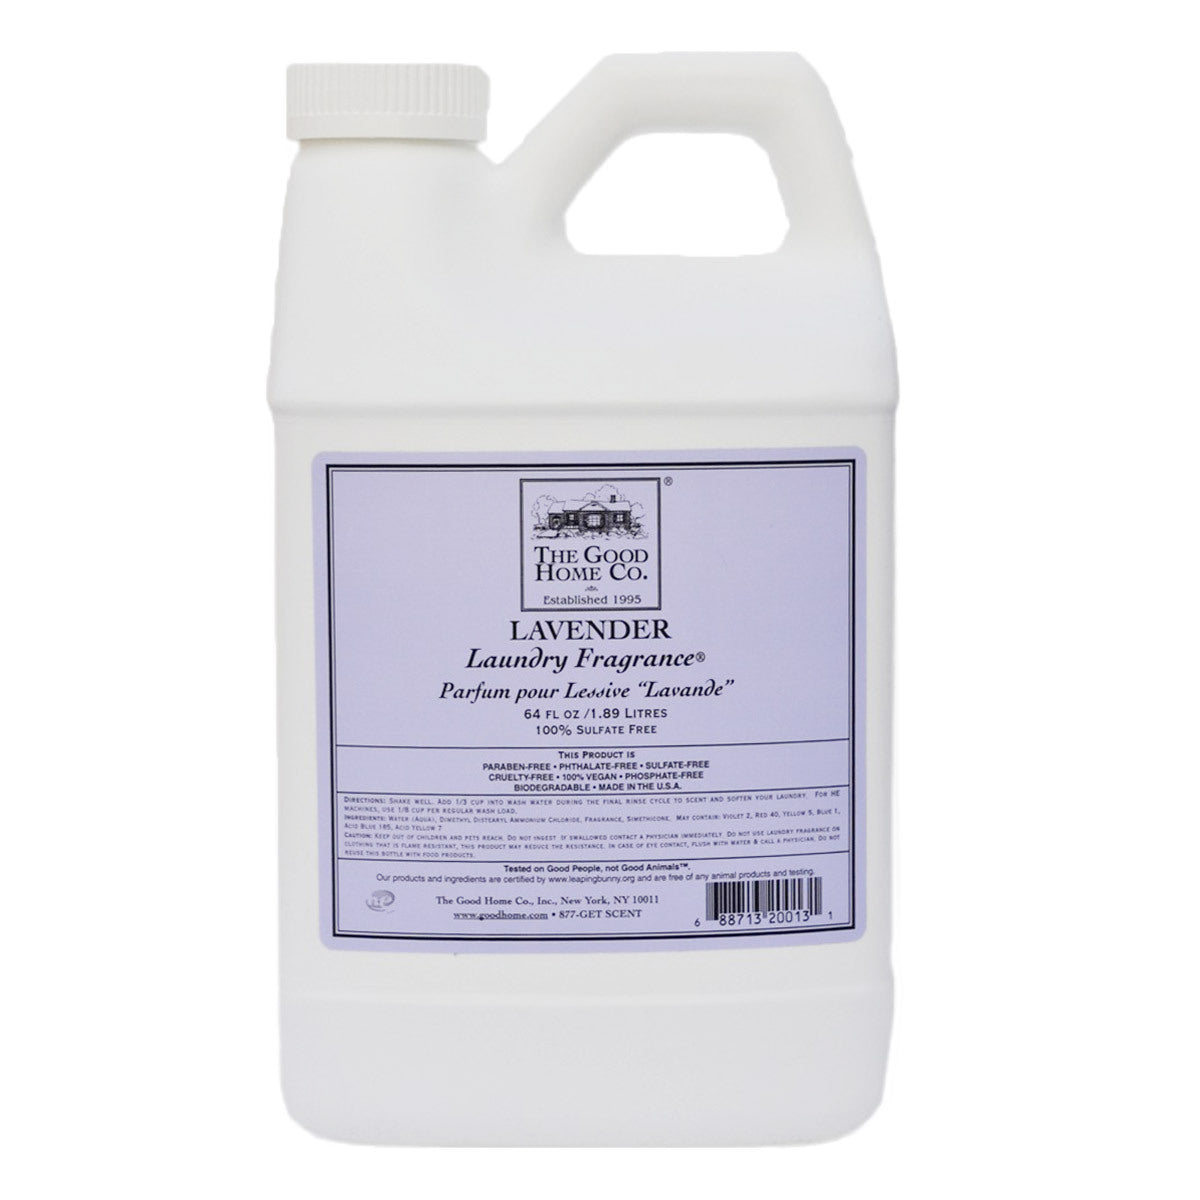 Primary image of Lavender Laundry Fragrance Refill